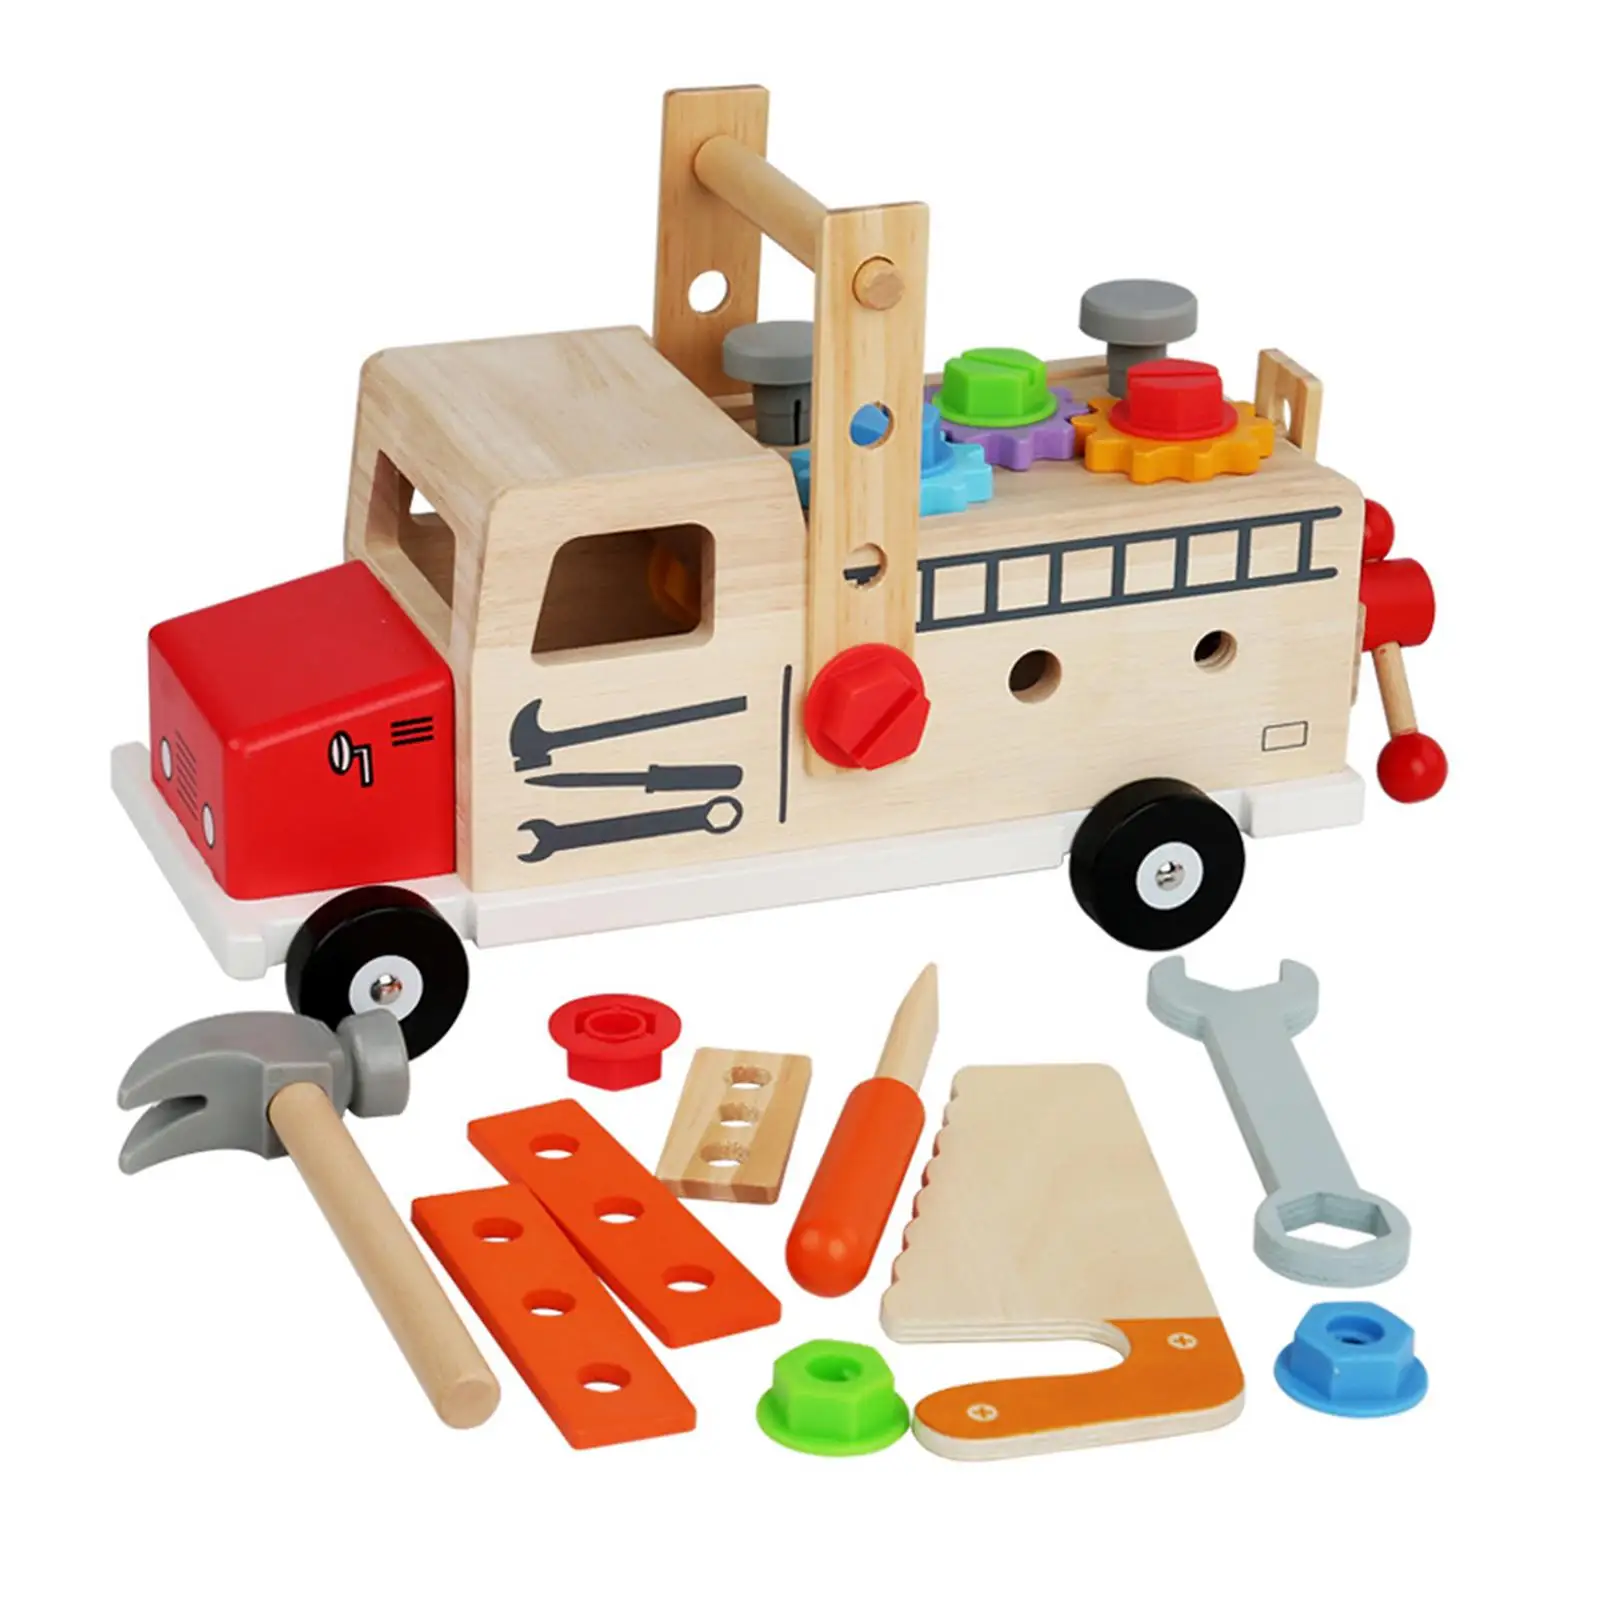 Construction Toy Stem Wood Kids Tool Set Pretend Play Tool Kits for Children Kid 3 4 5 6 Years Old Boys Girls Xmas Present